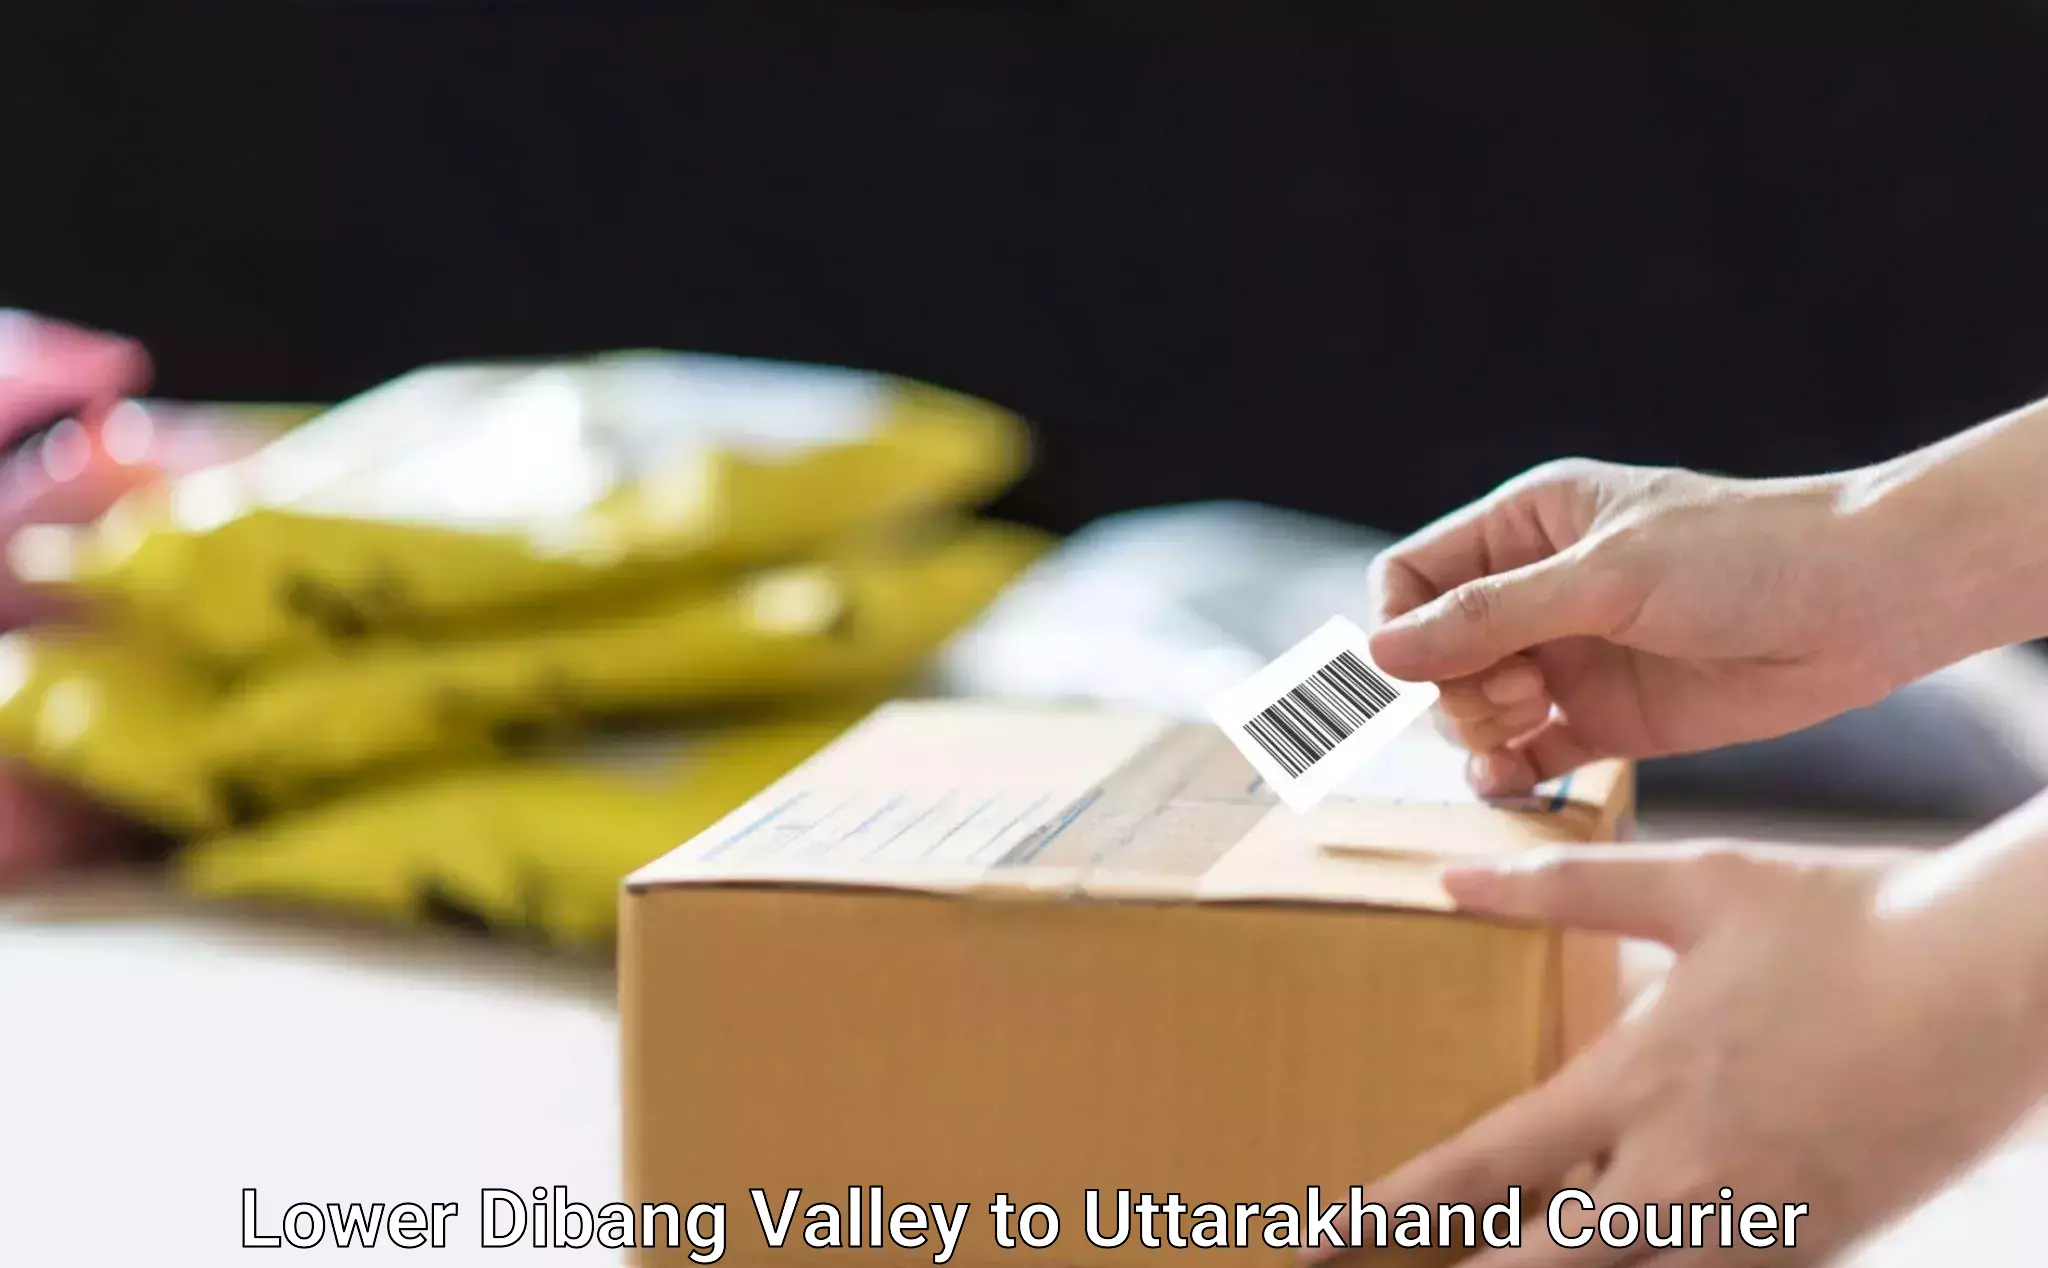 Reliable shipping partners Lower Dibang Valley to Uttarakhand